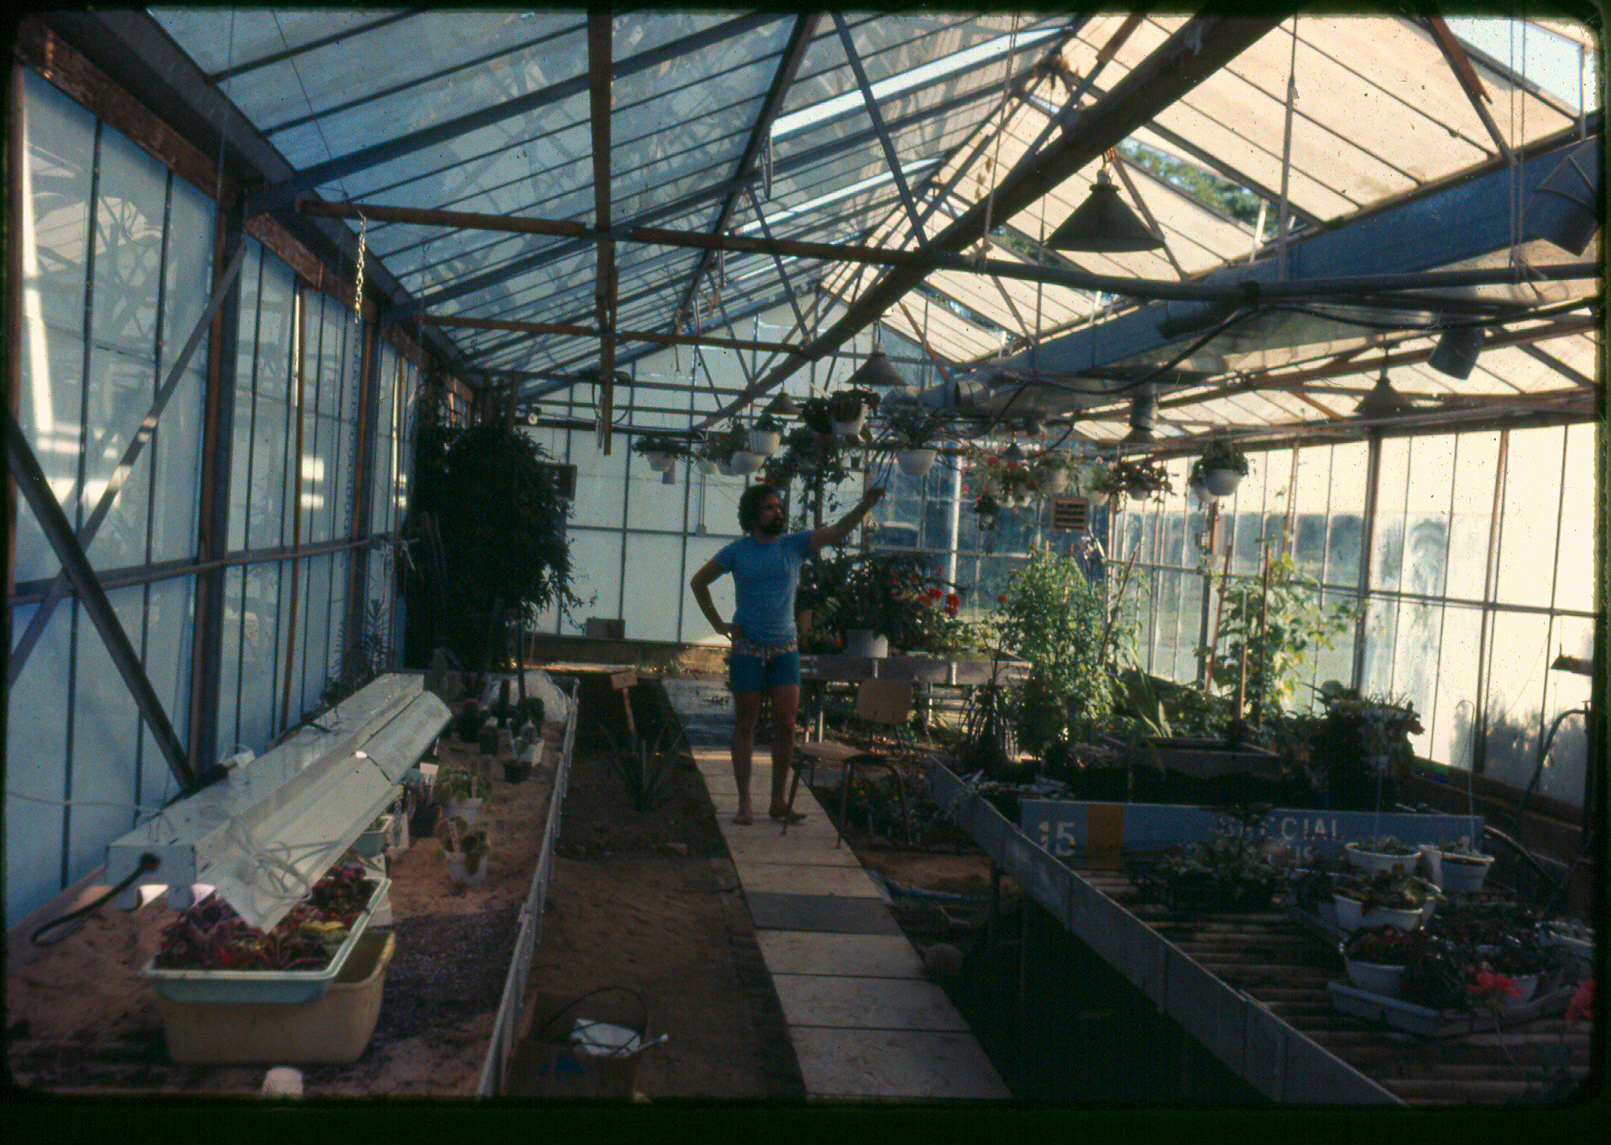 The Hampton Gardener circa 1974. The early stages of renovating the Jacobs greenhouse with some hanging baskets in production.